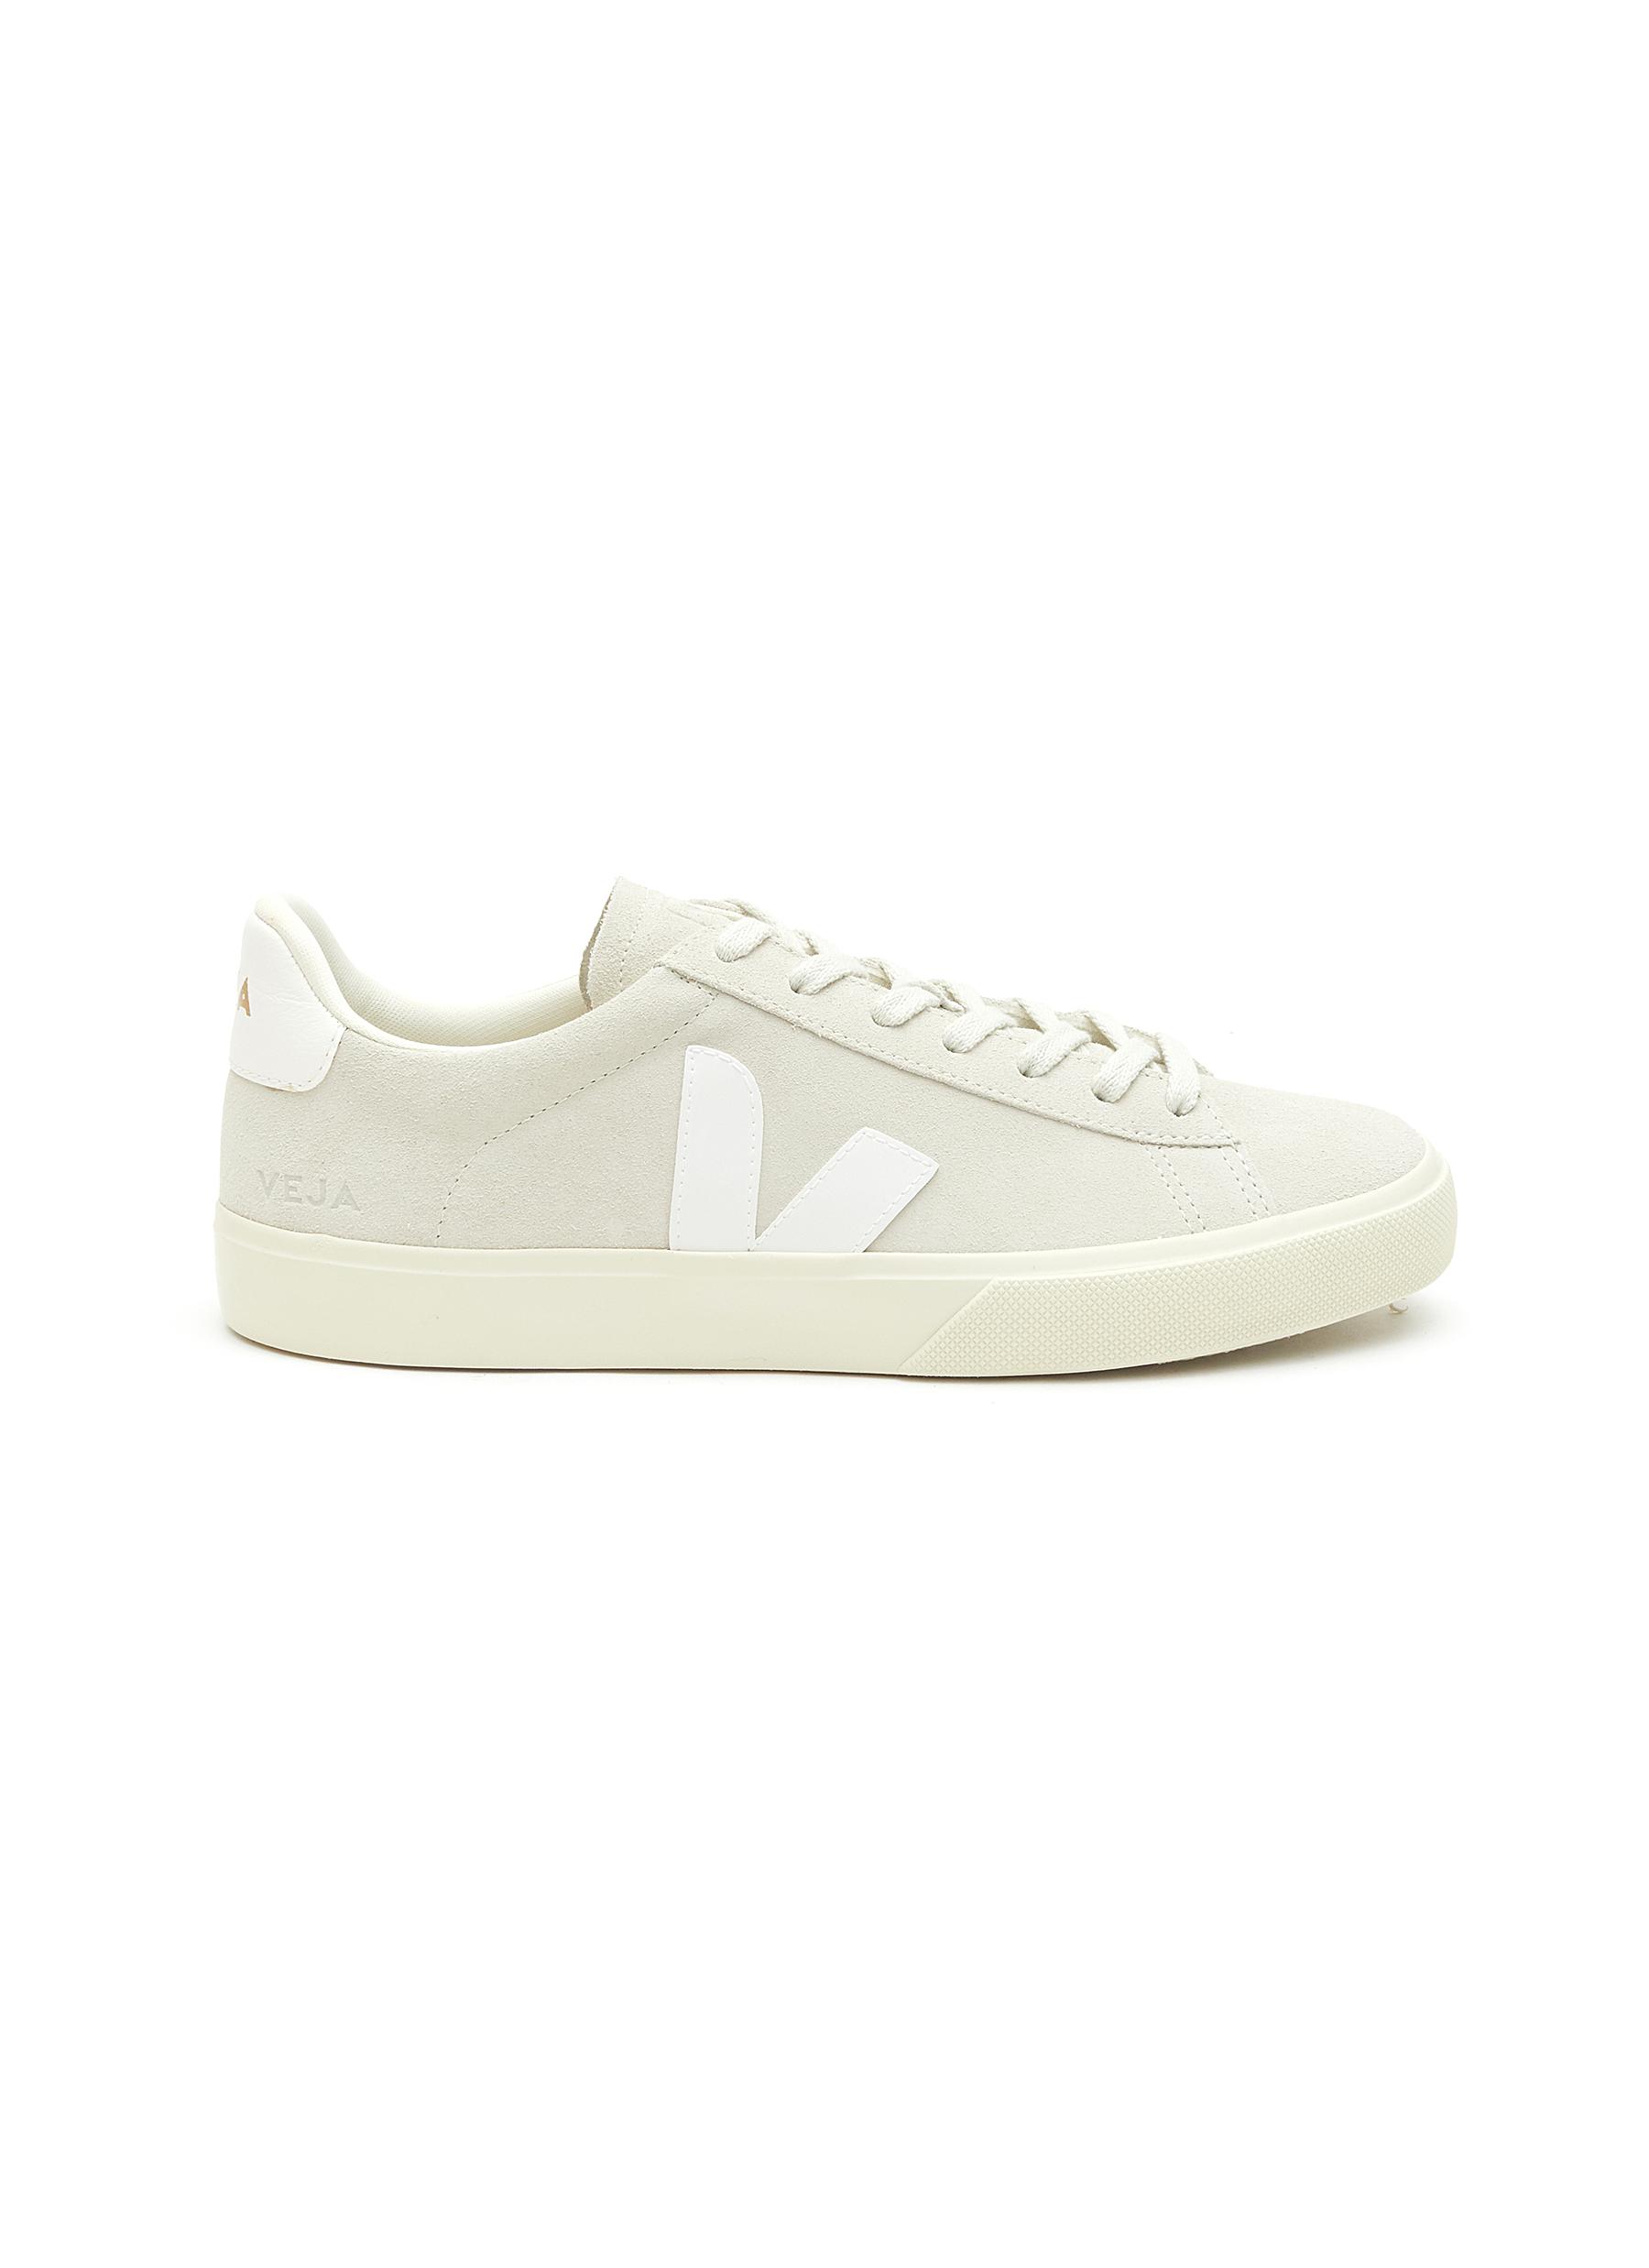 'Campo' Suede Low-Top Lace-Up Sneakers